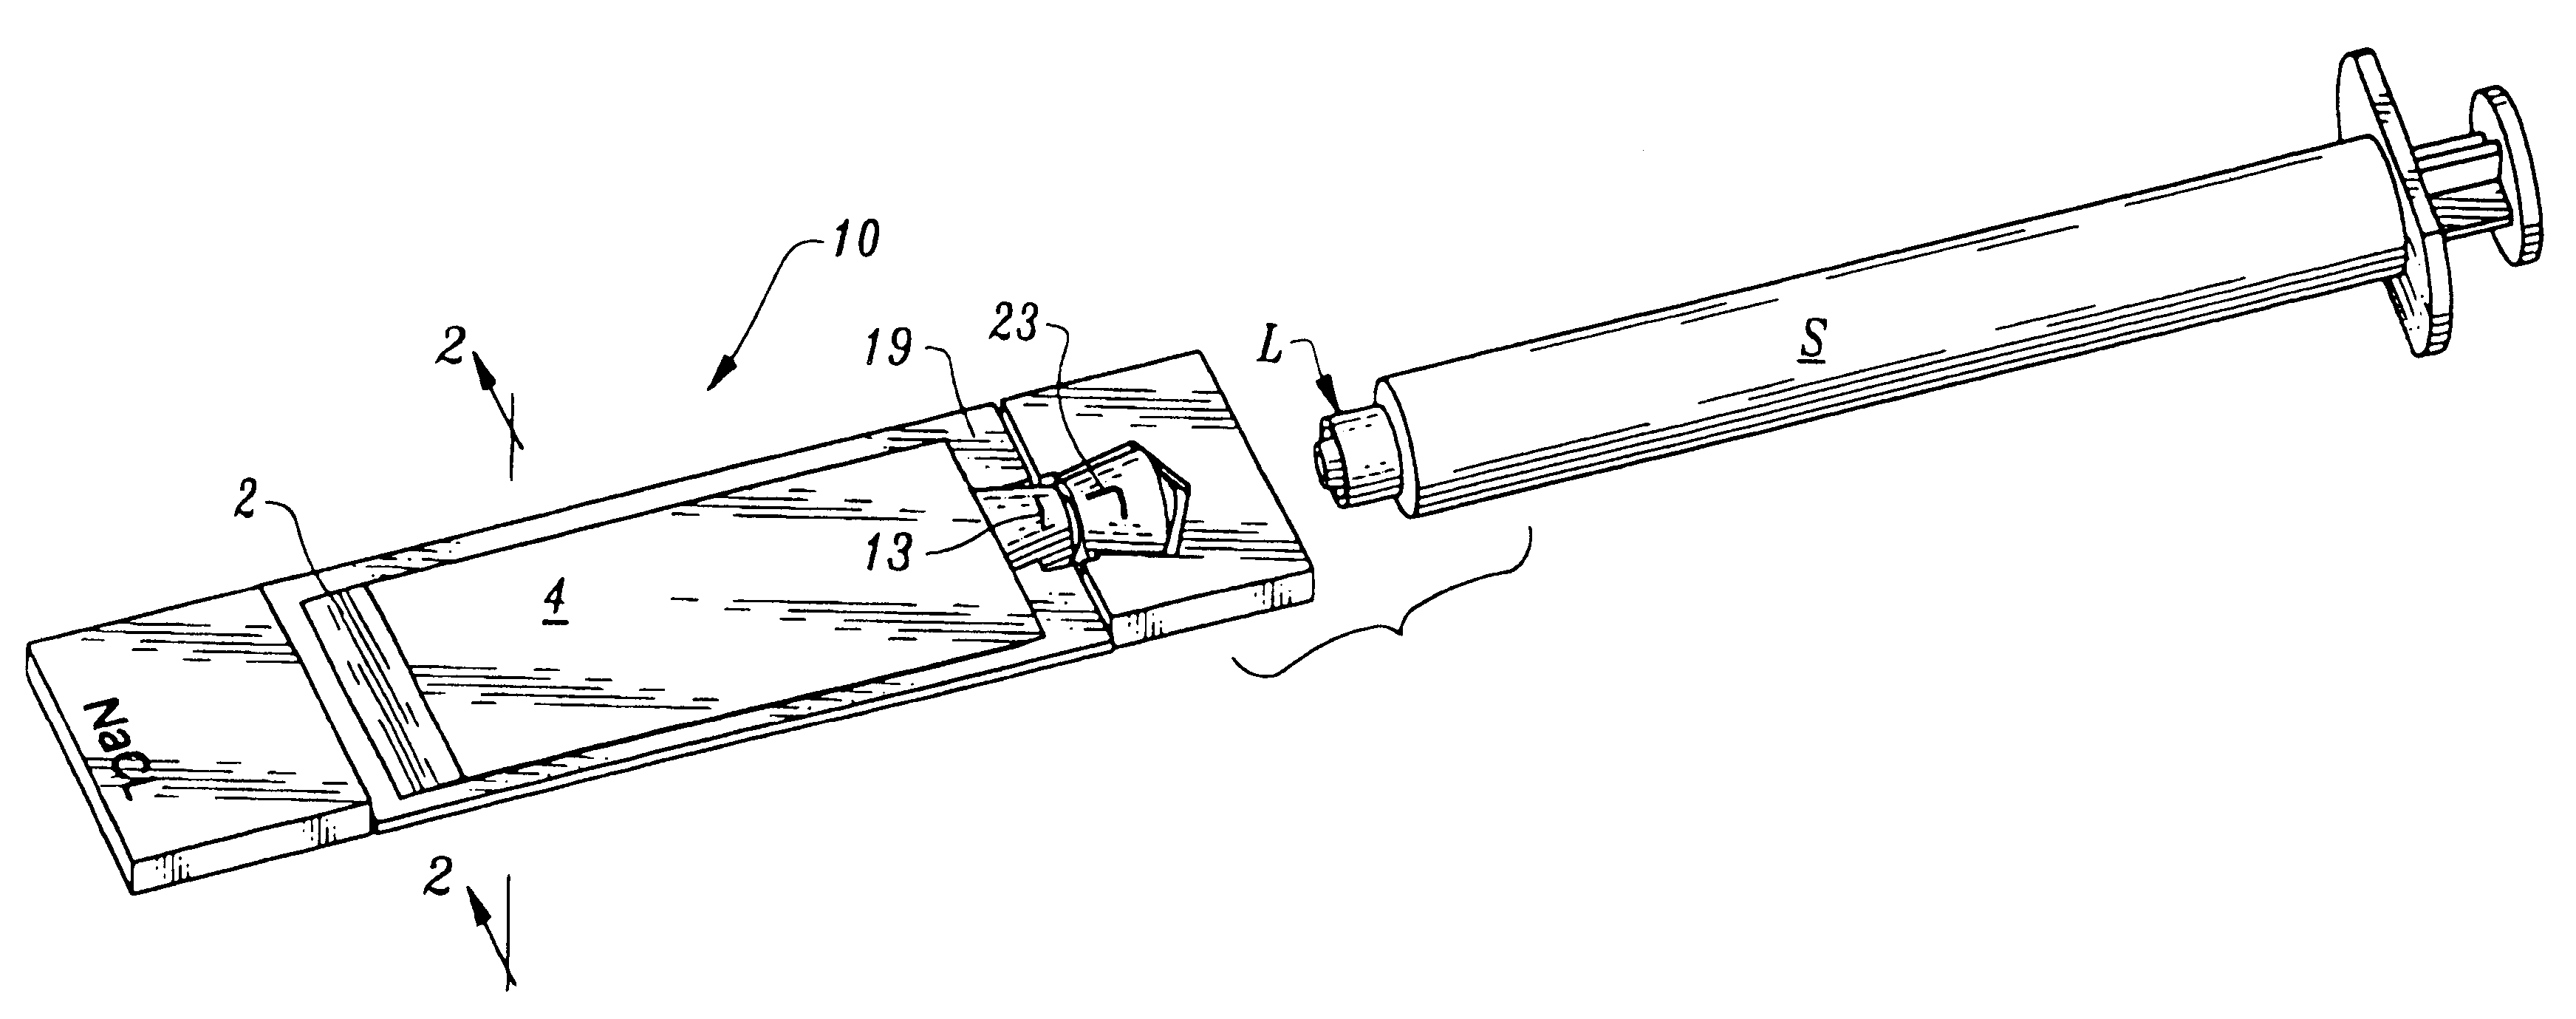 Needleless method and apparatus for transferring liquid from a container to an injecting device without ambient air contamination